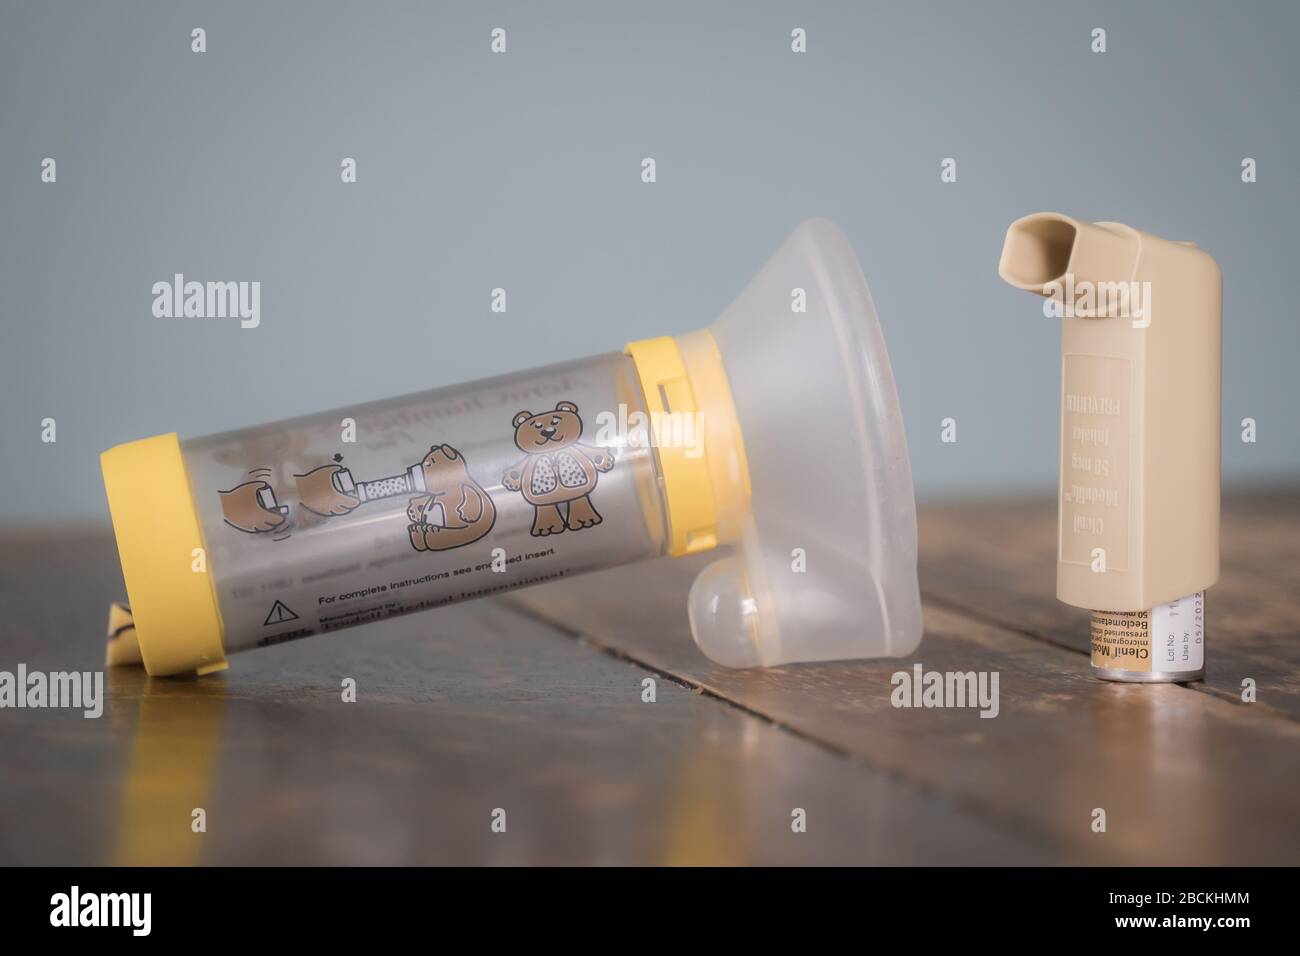 London, UK - April 3, 2020 - Clenil (beclomethasone) inhaler and child Aerochamber spacer; commonly prescribed medication for asthma treatment Stock Photo